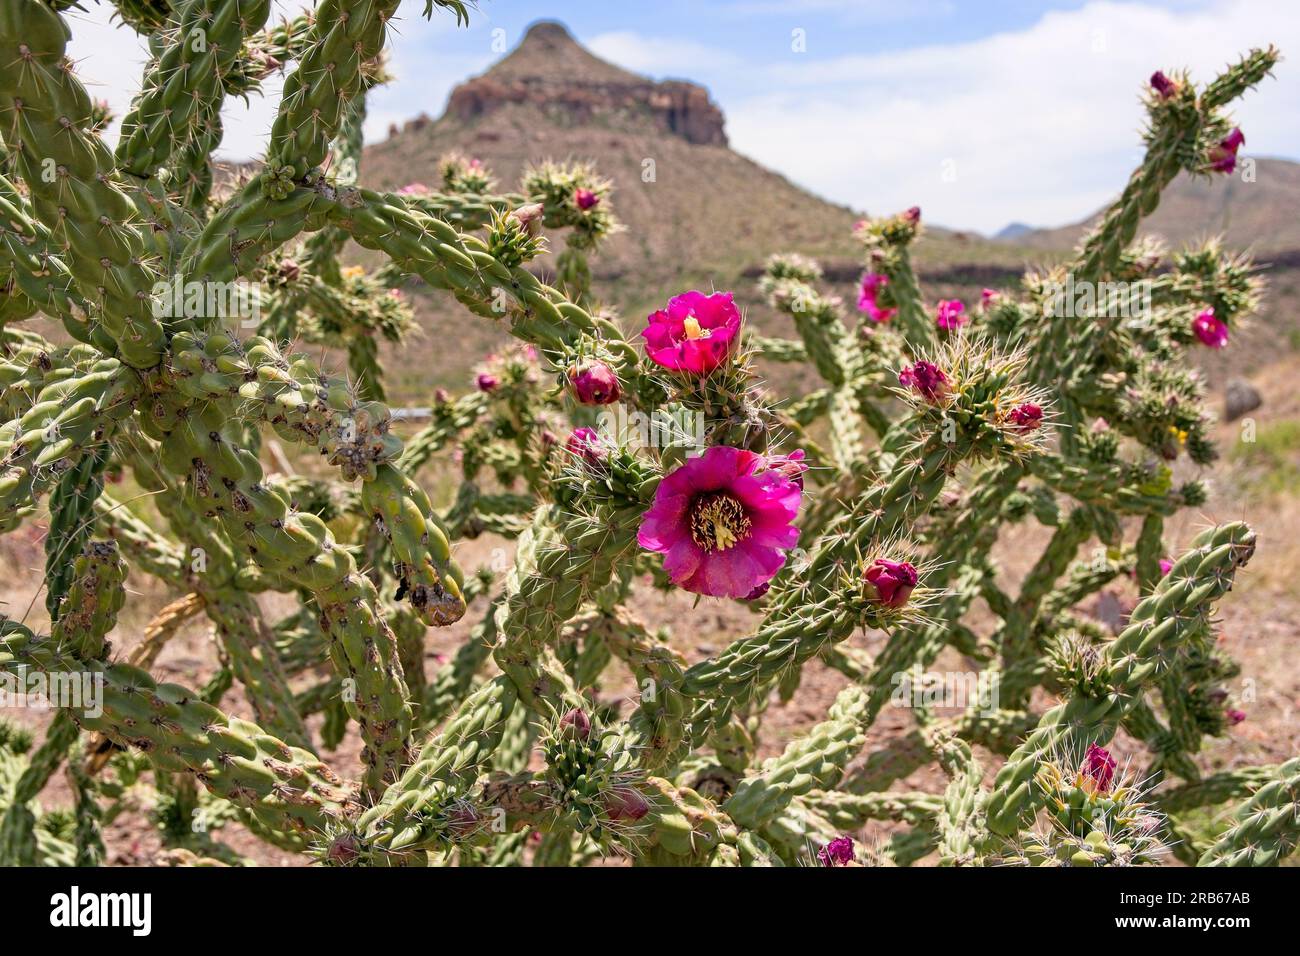 Blooming cane cholla cactus (Cylindropuntia imbricata) stand before eroding peak in Chihuahuan desert of Big Bend National Park Stock Photo